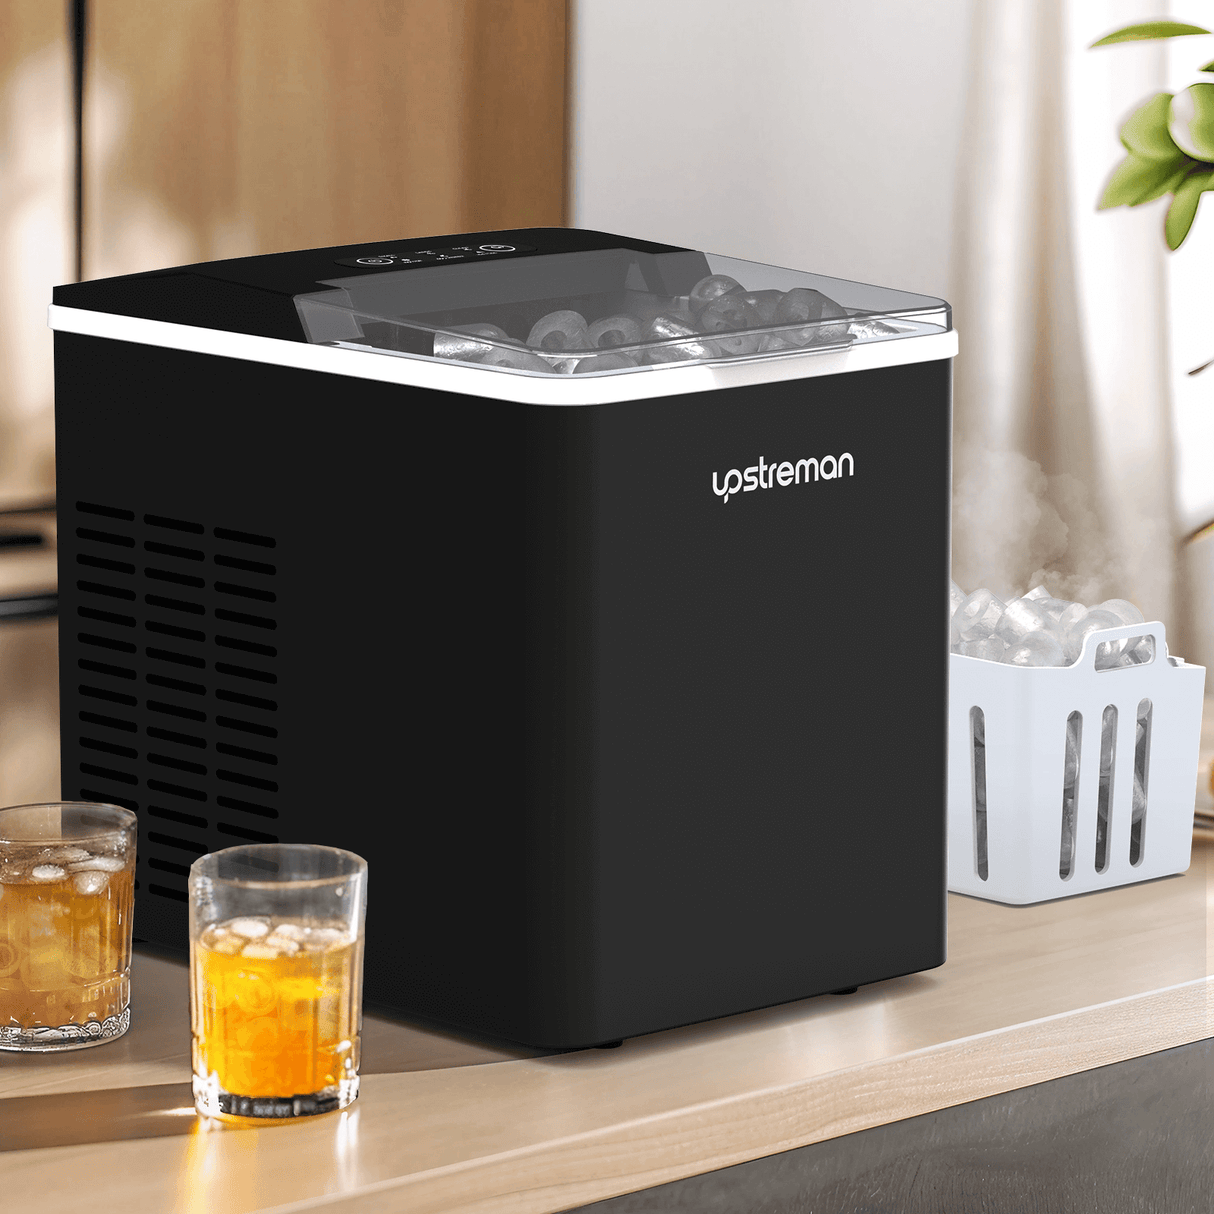 Upstreman Y90 Pro Countertop Ice Maker with Self-Cleaning, 26lbs in 24Hrs, 9 Ice Cubes Ready in 6 Mins, for Home, Kitchen, Office, Bar, Party,